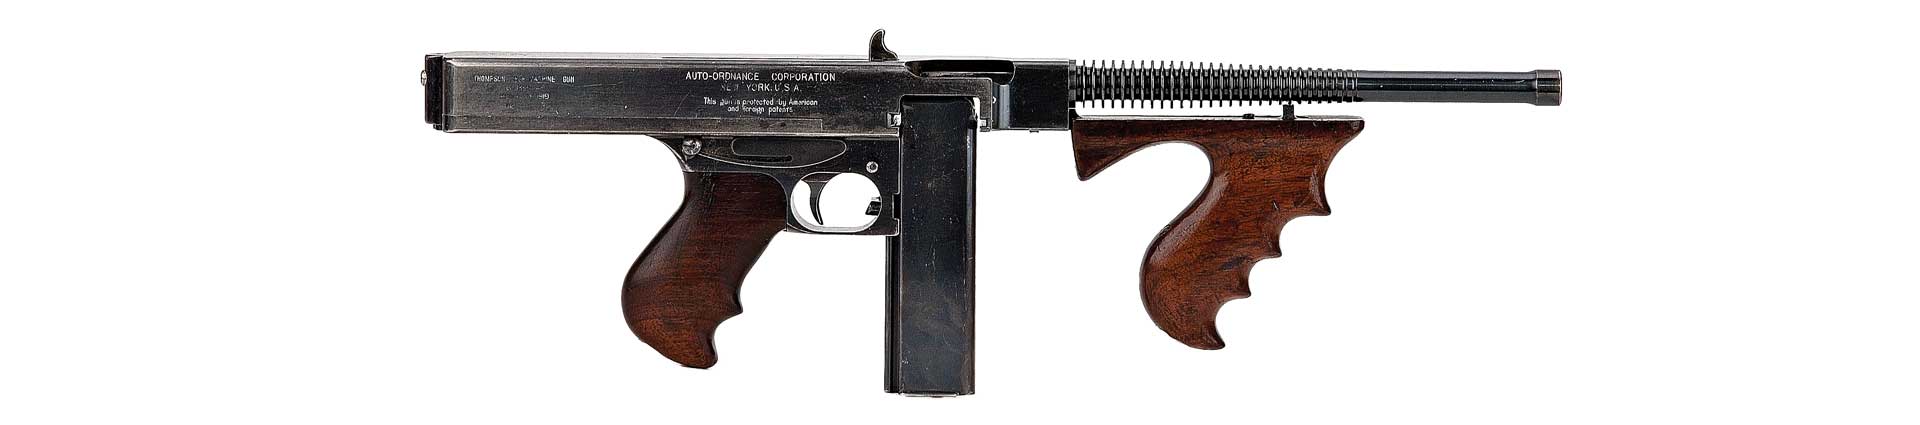 Serial No. 7, an Annihilator III, Model C, was not designed with a buttstock or sights. Its actuator is offset to the right, and it fired 1,500 r.p.m.